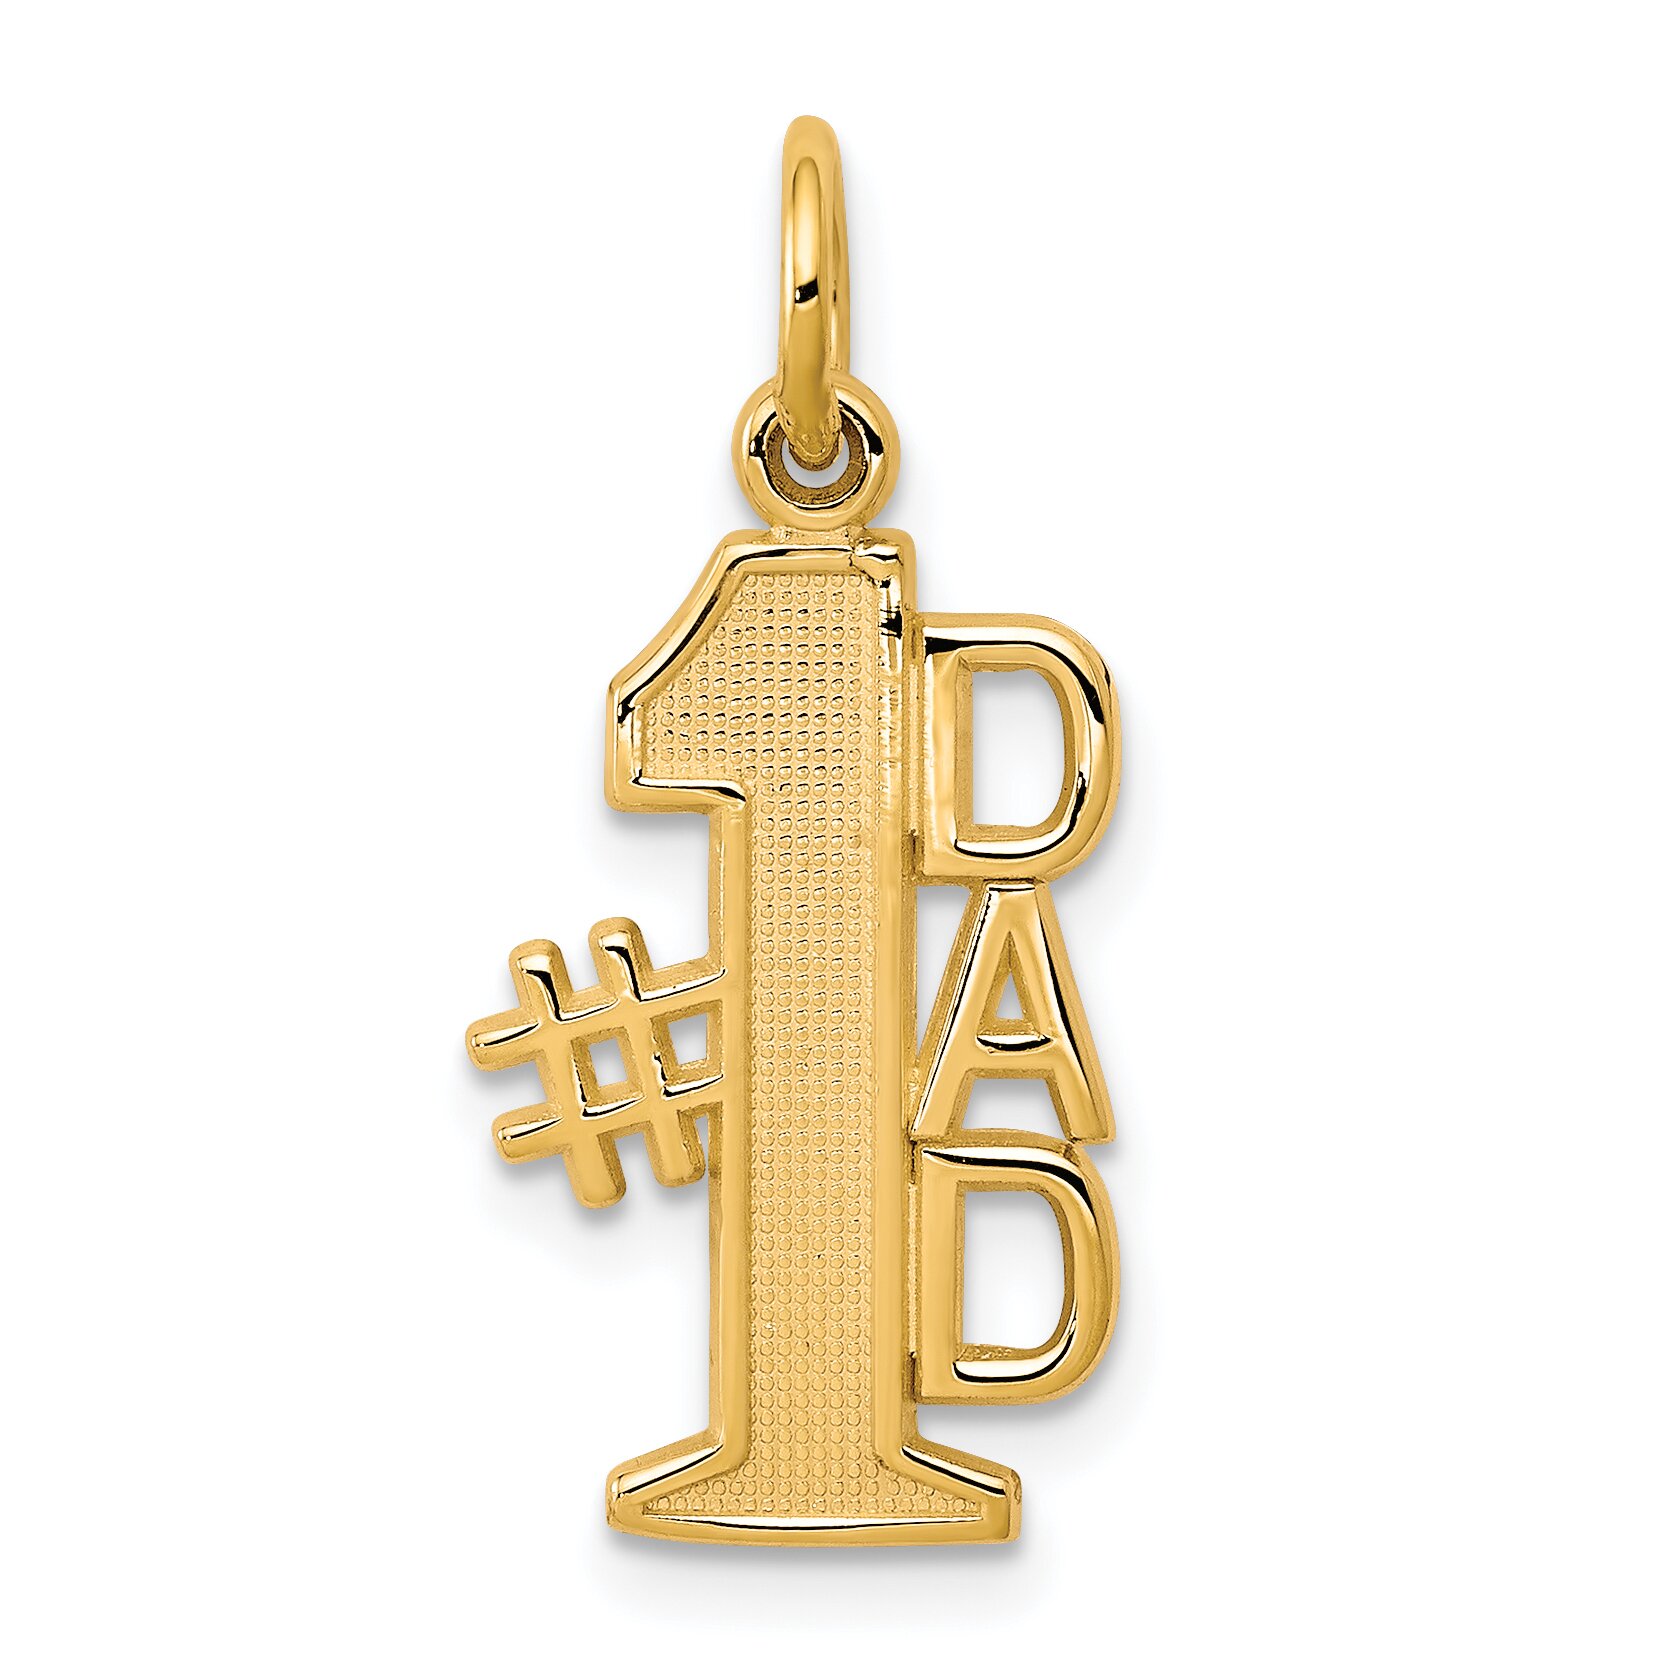 Findingking 10K Yellow Gold #1 Dad Charm Father Jewelry FindingKing